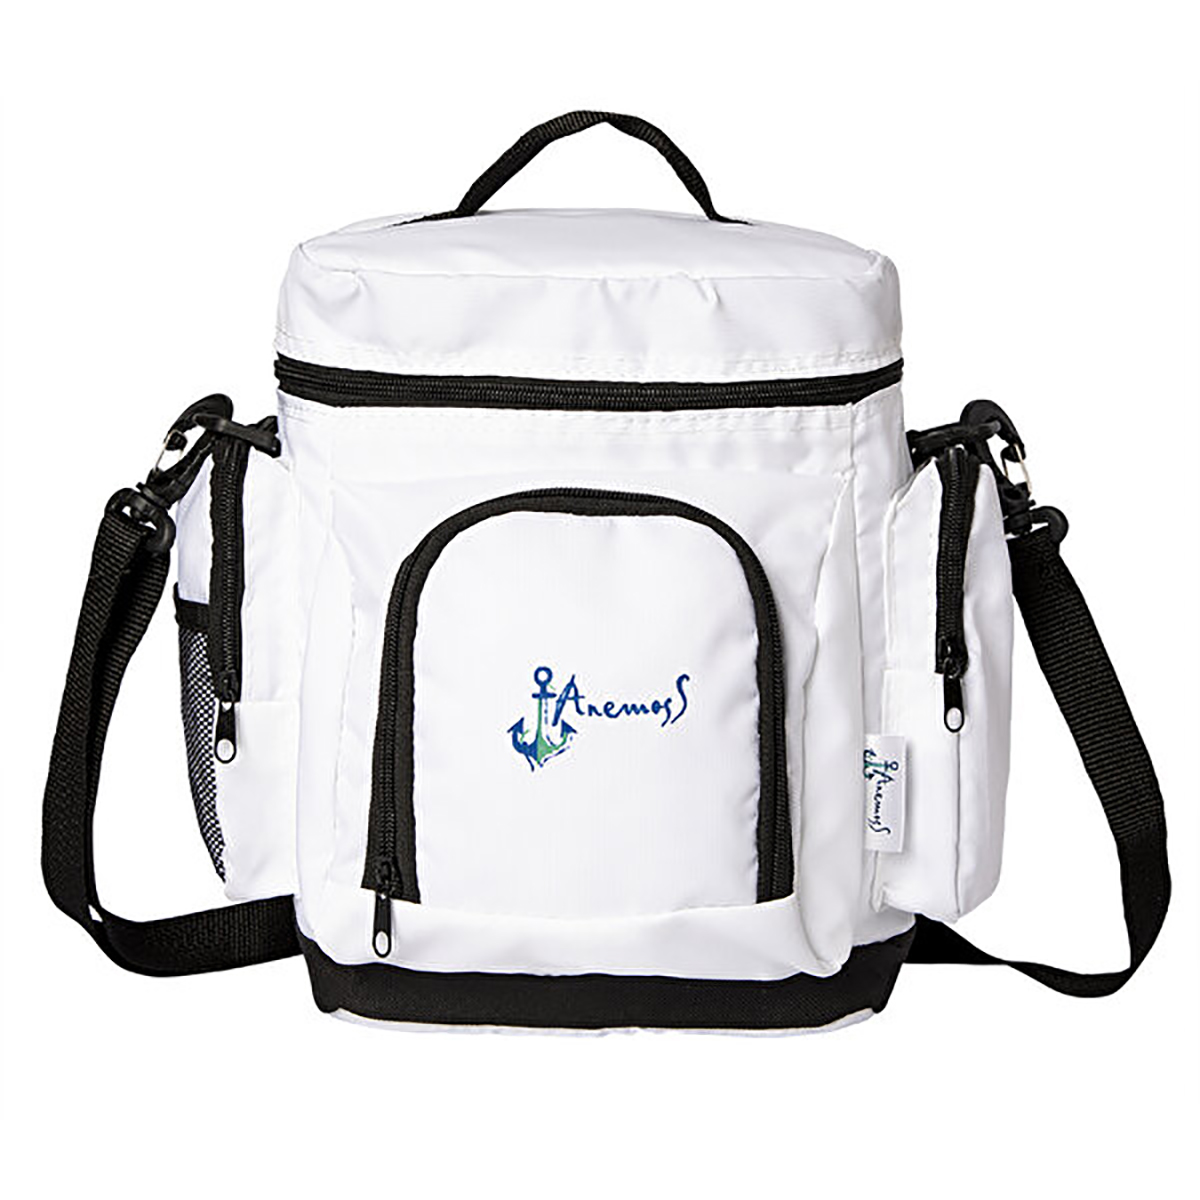 Anemoss white insulated lunch bag